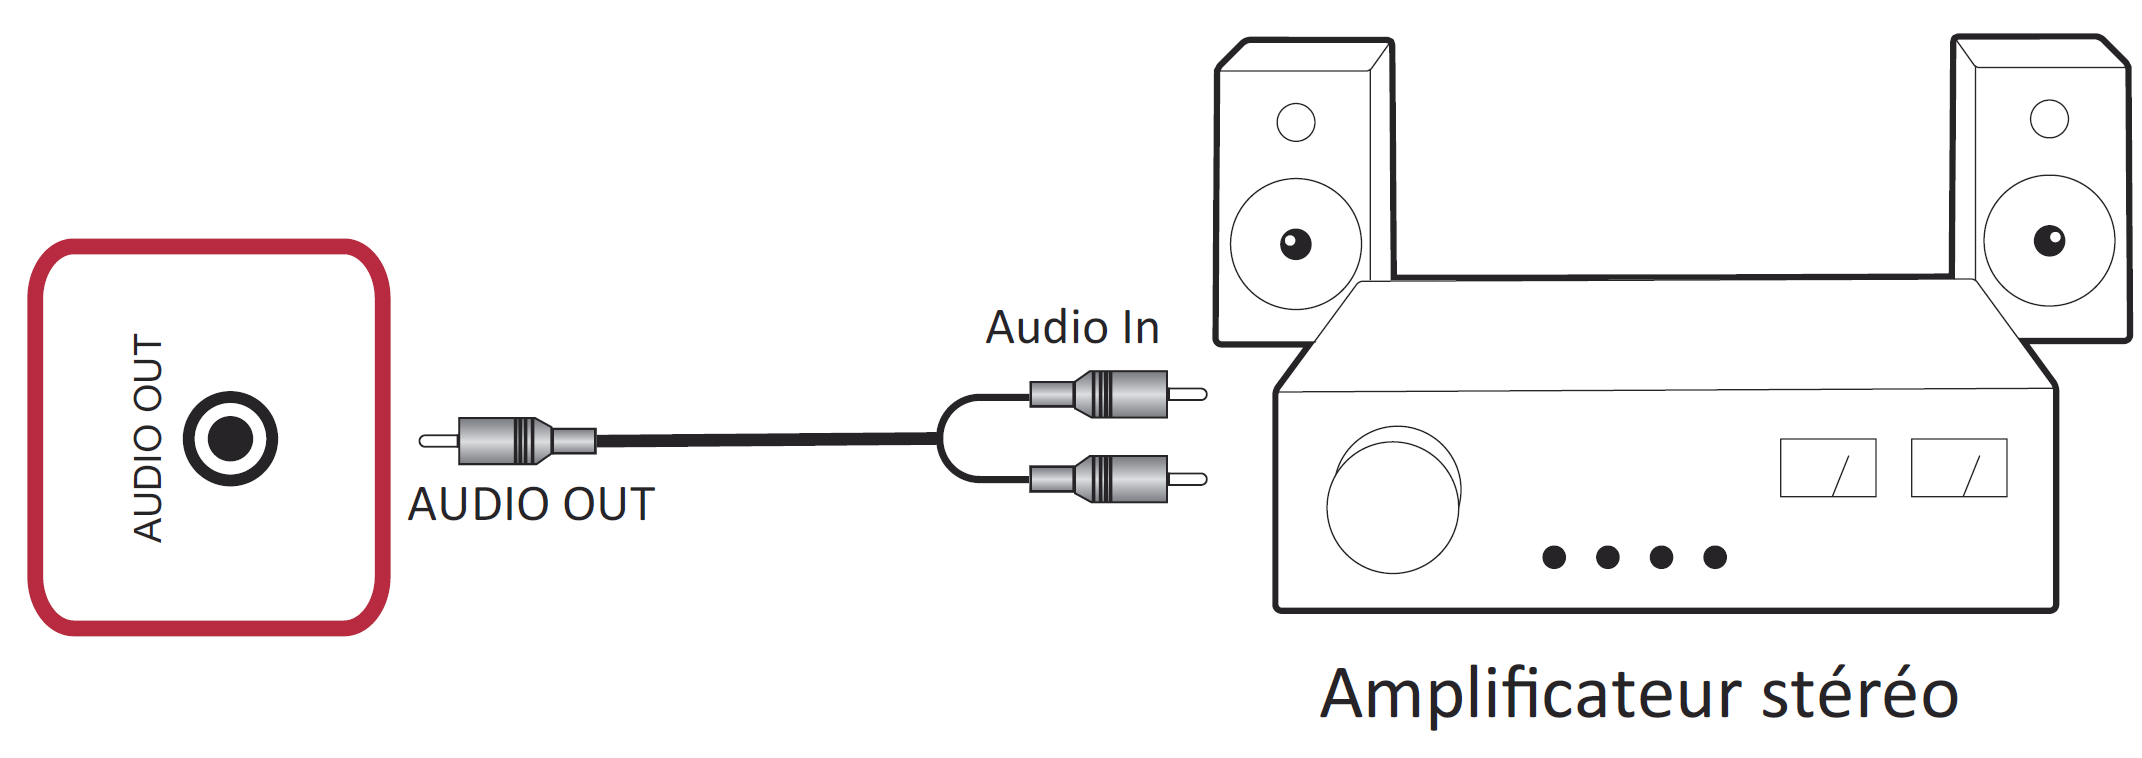 File:LD Connect Audio Fr.png